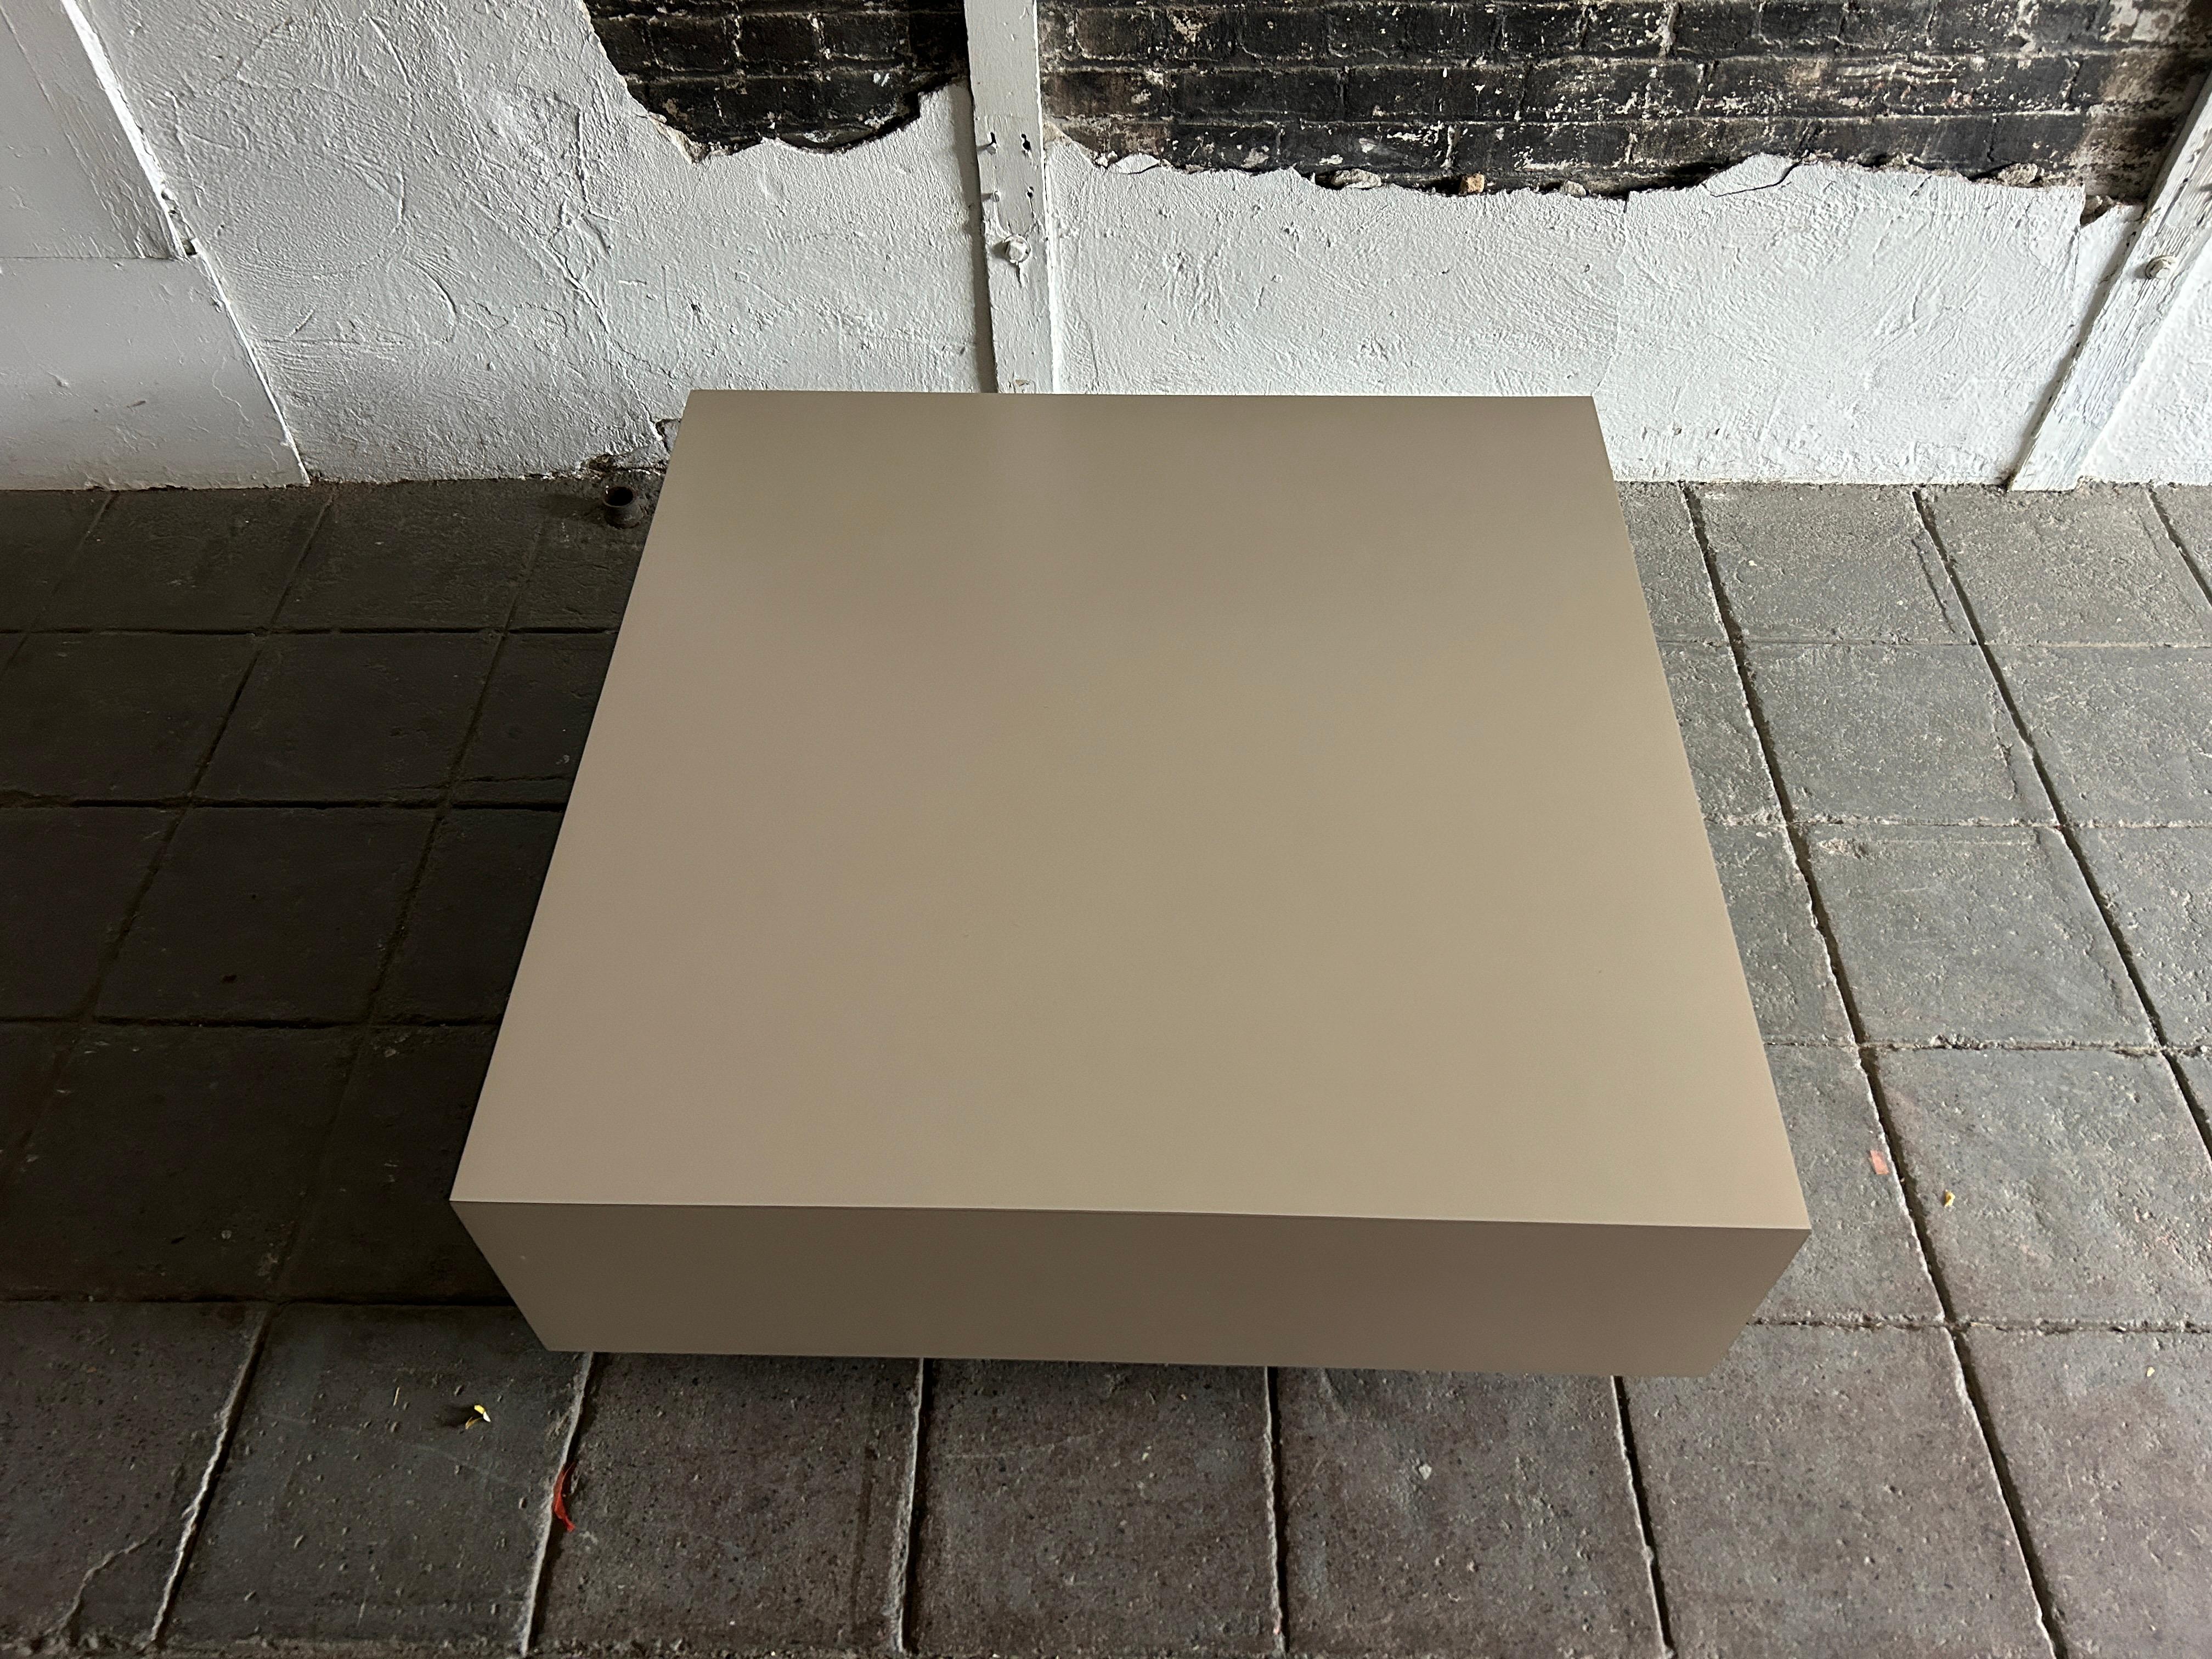 A Mid-Century Modern cube square tan laminate floating coffee table. The table is in great original vintage condition High quality satin tan Laminate. Great design, clean table all around. Ready for use. Located to Brooklyn NYC.

Measures: 40